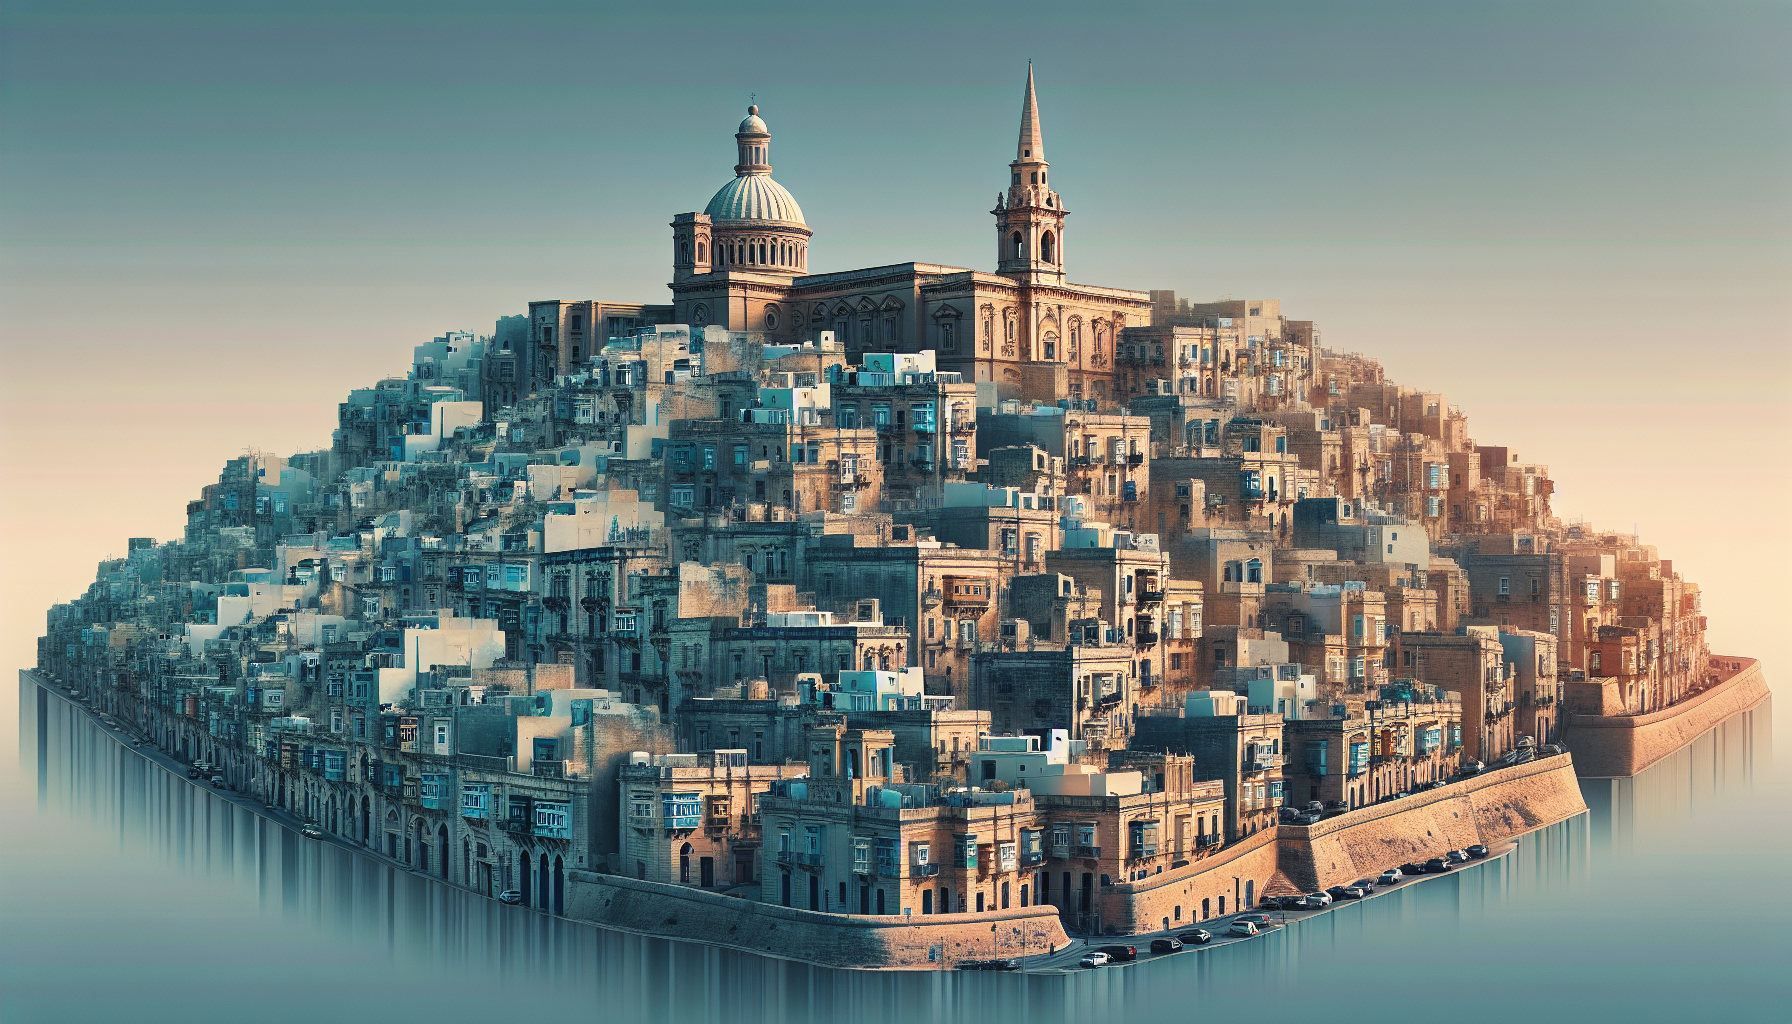 Valletta: Europe’s Smallest Capital City with Stunning Architecture